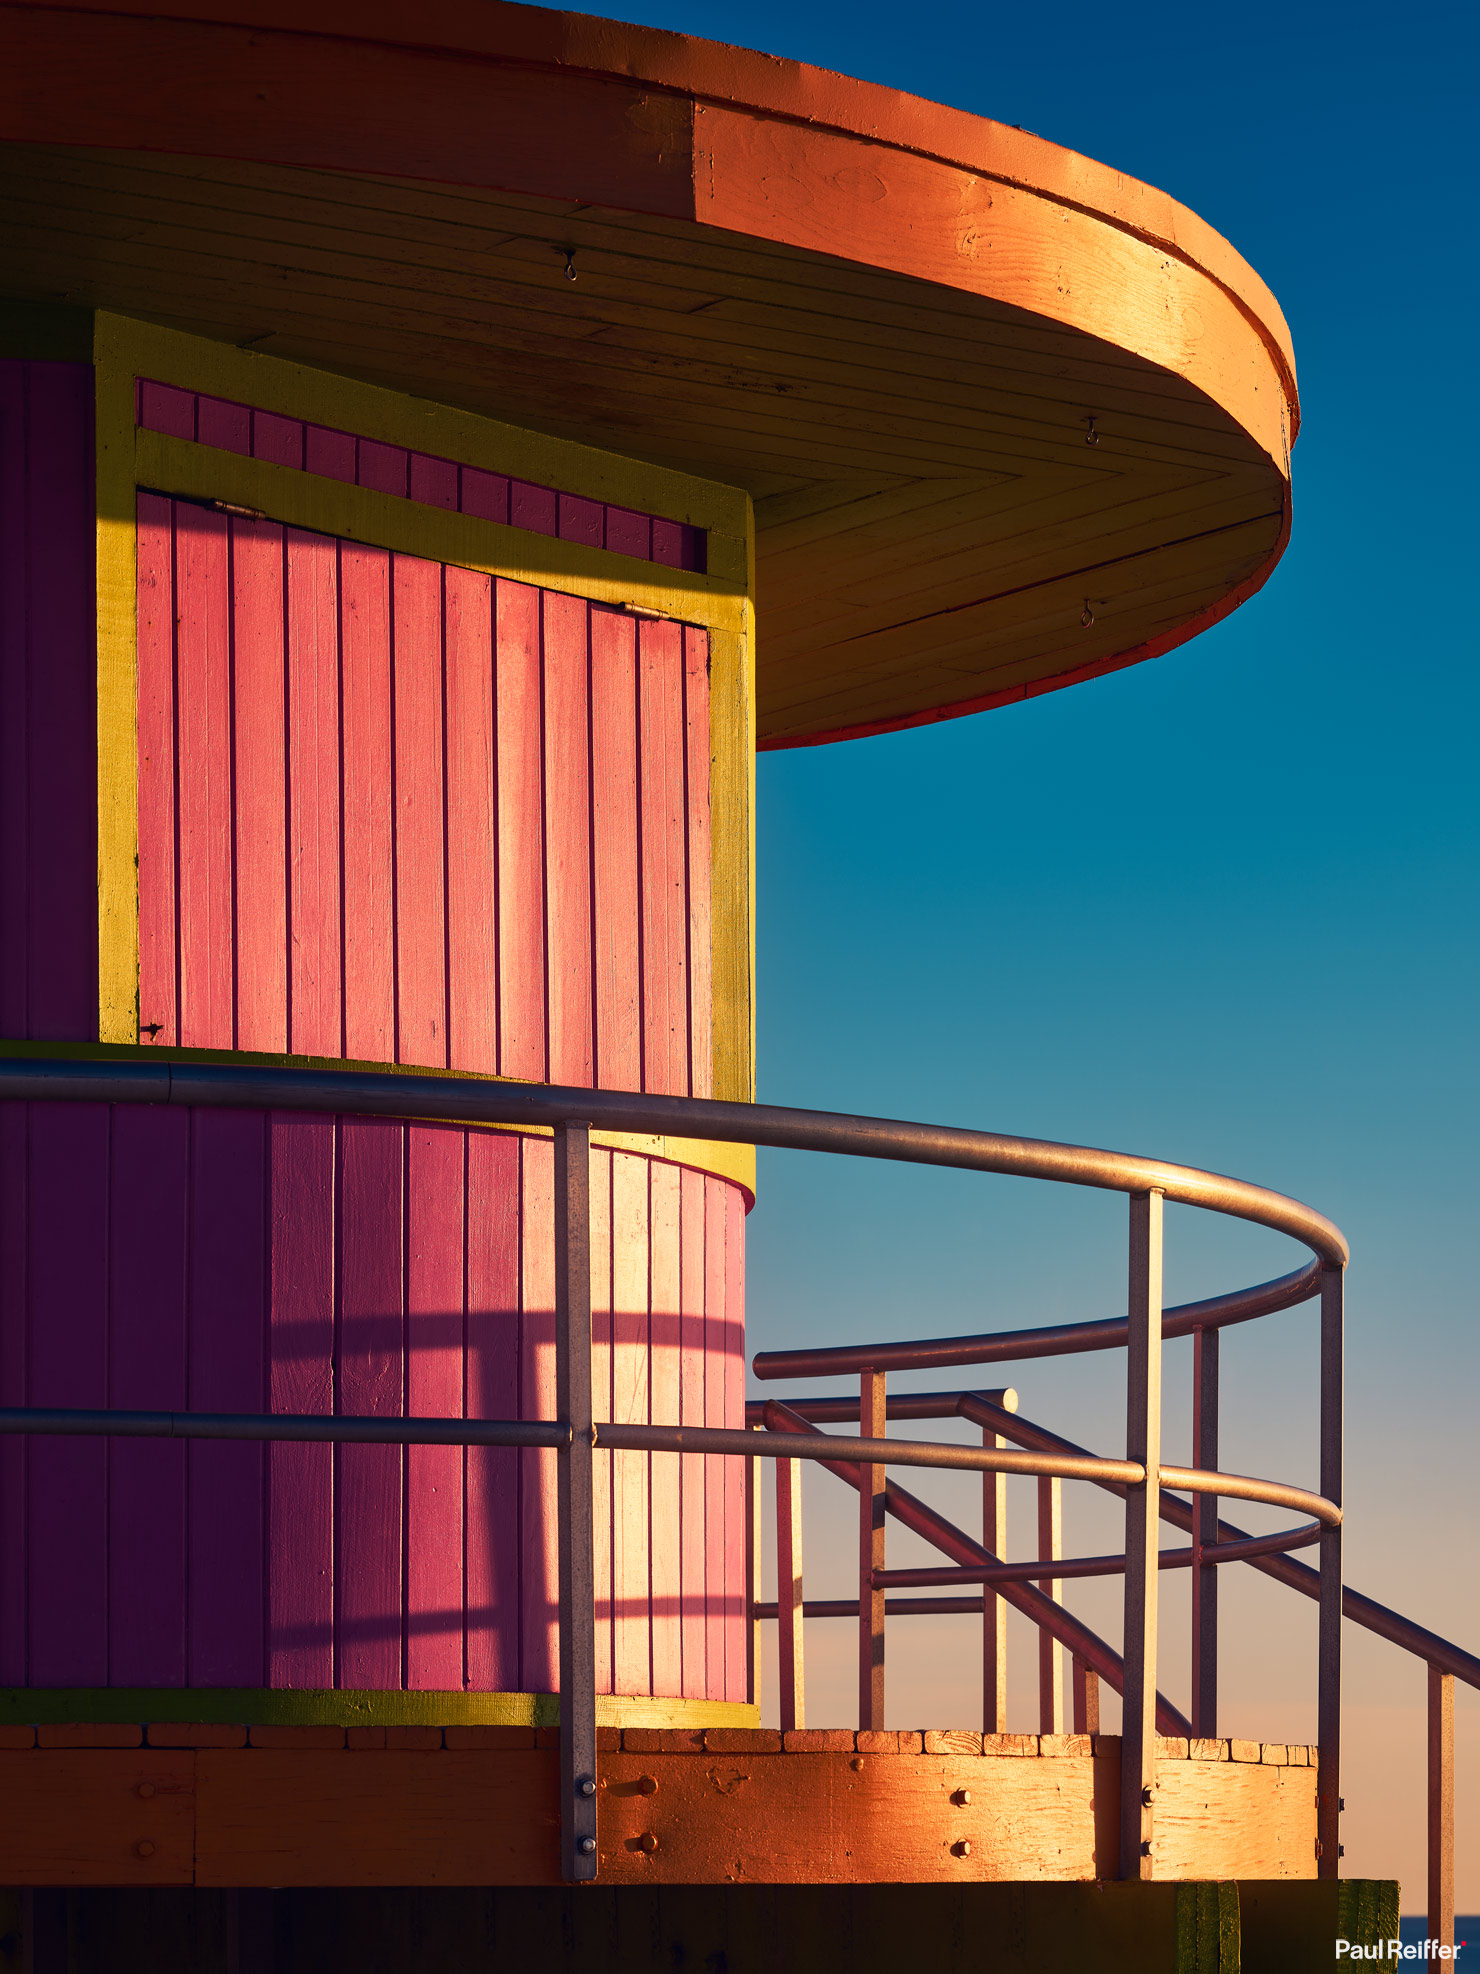 South Beach 10th Street Lifeguard Tower Close Up Miami Florida Fine Art Wall Decor Paul Reiffer Professional Landscape Photographer Phase One